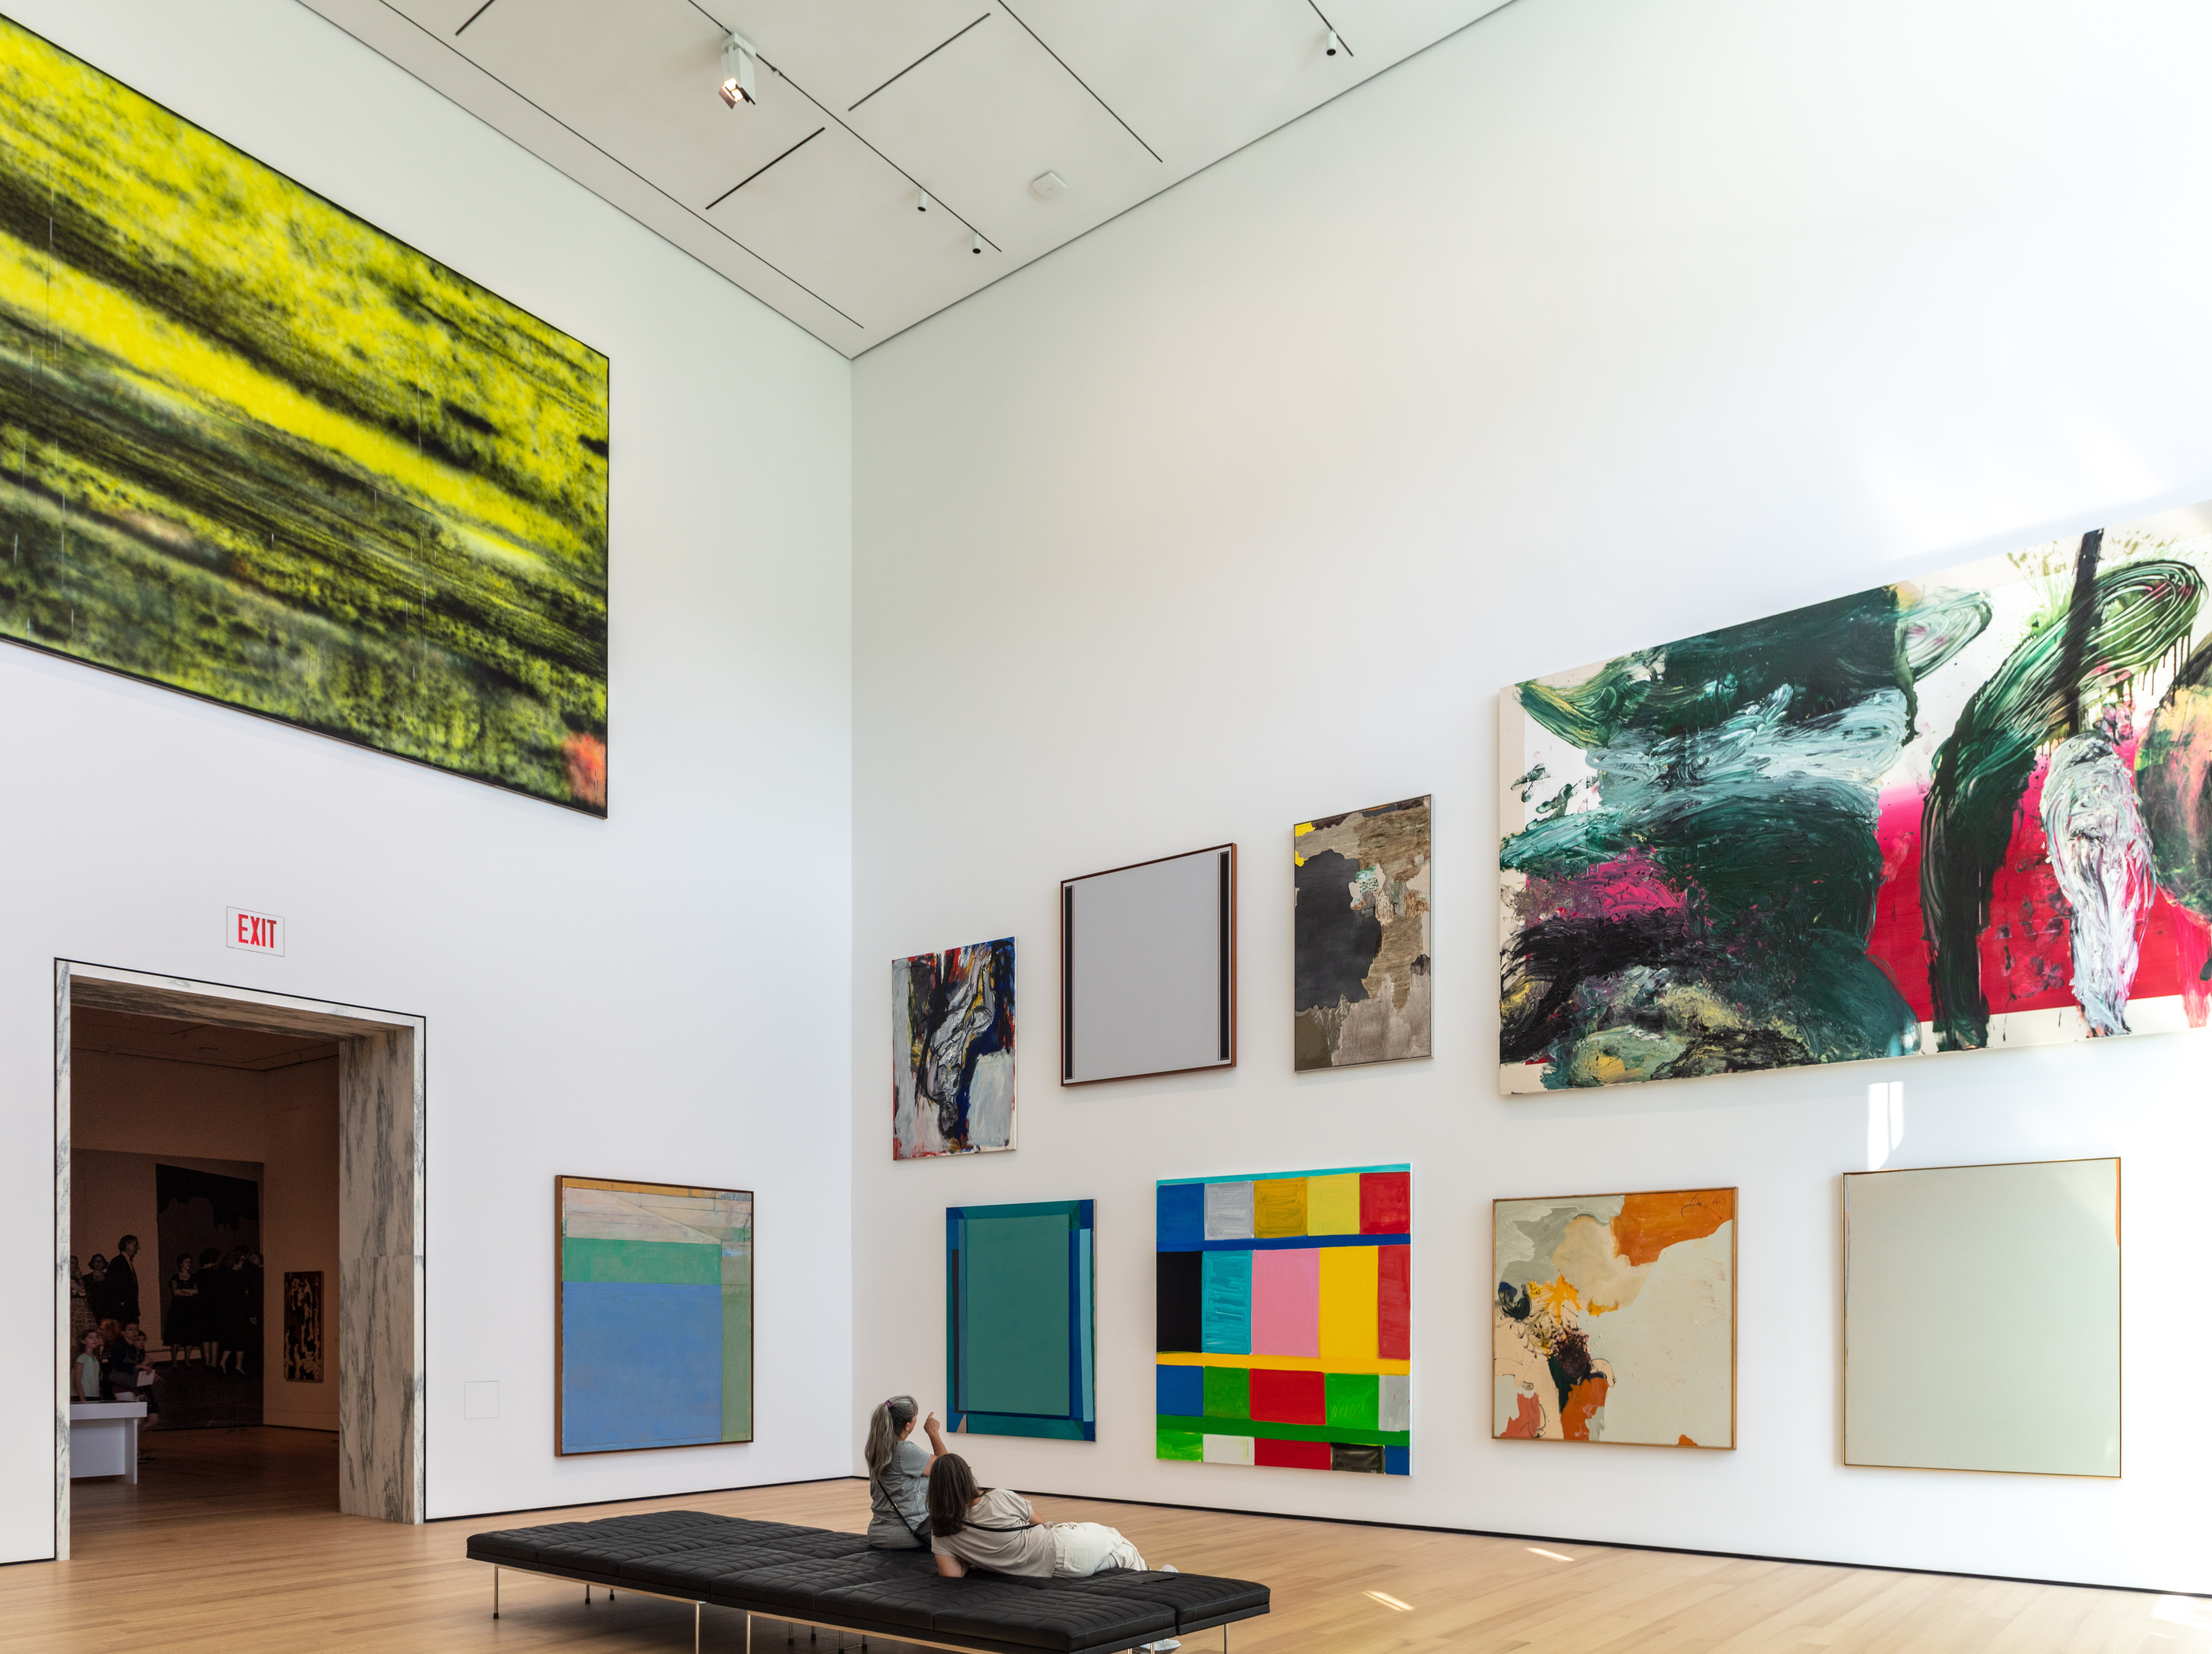 Extremely tall gallery walls with abstract paintings hung up